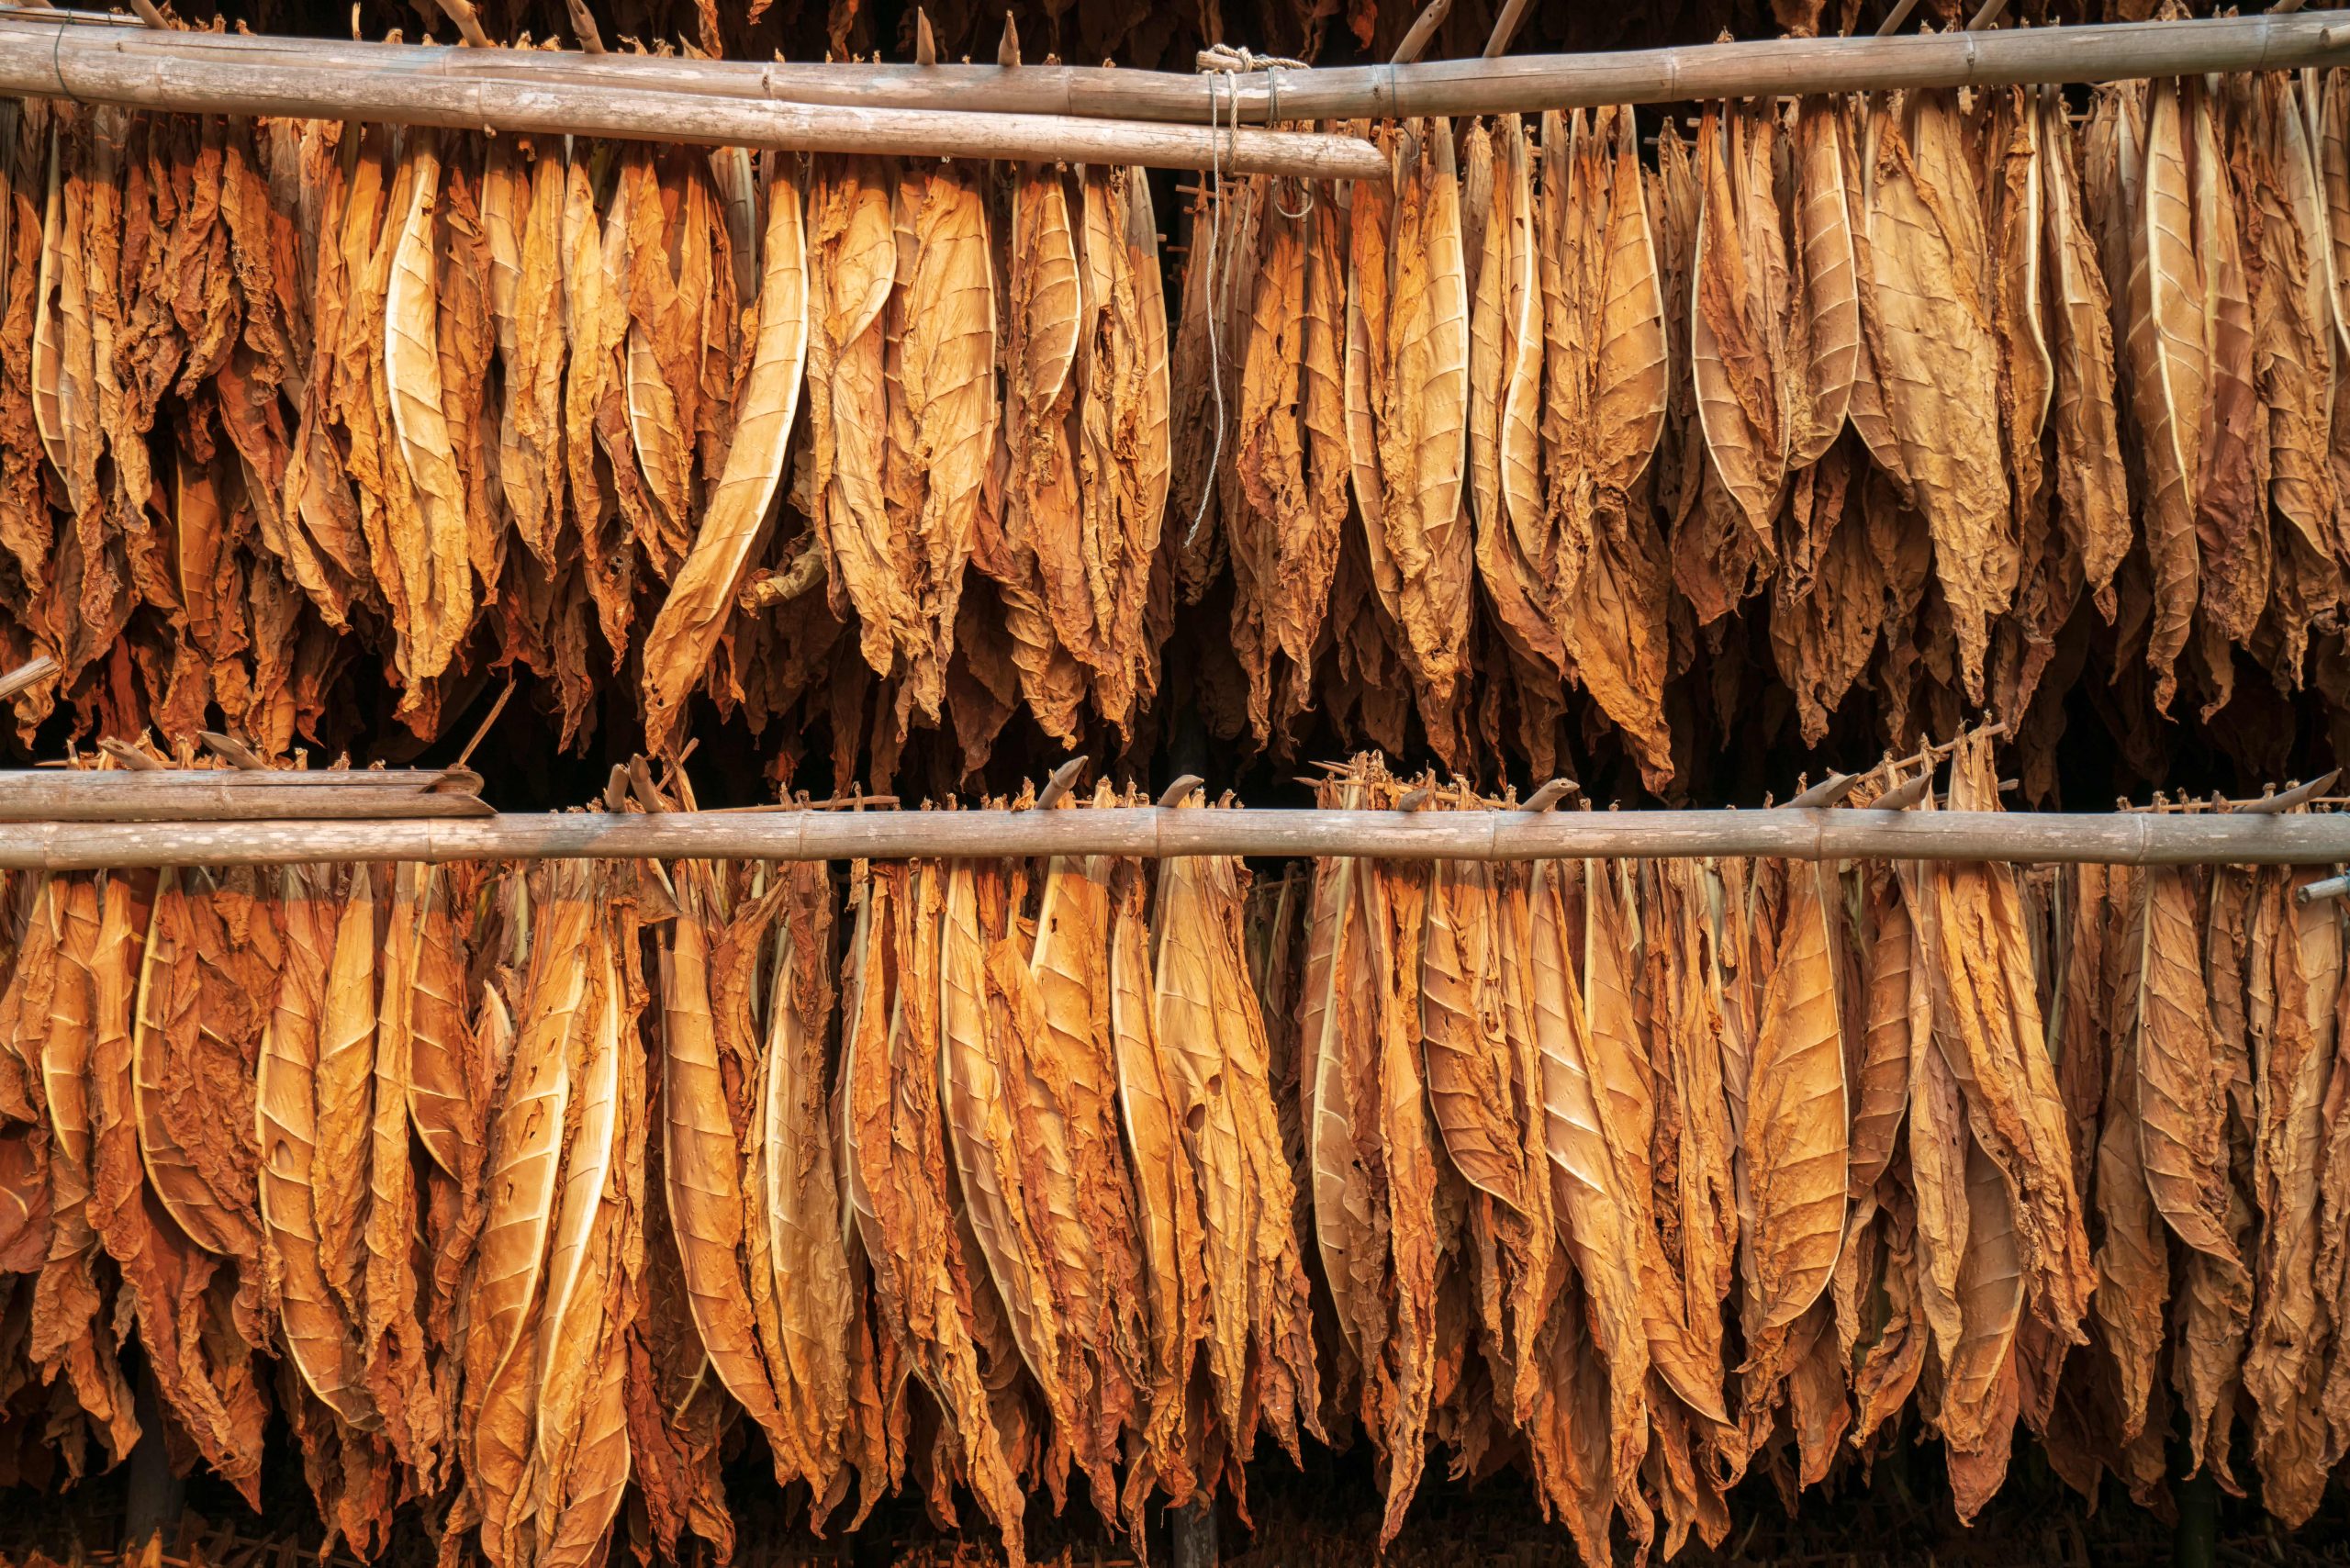 Curing,Burley,Tobacco,Hanging,In,A,Barn.tobacco,Leaves,Drying,In